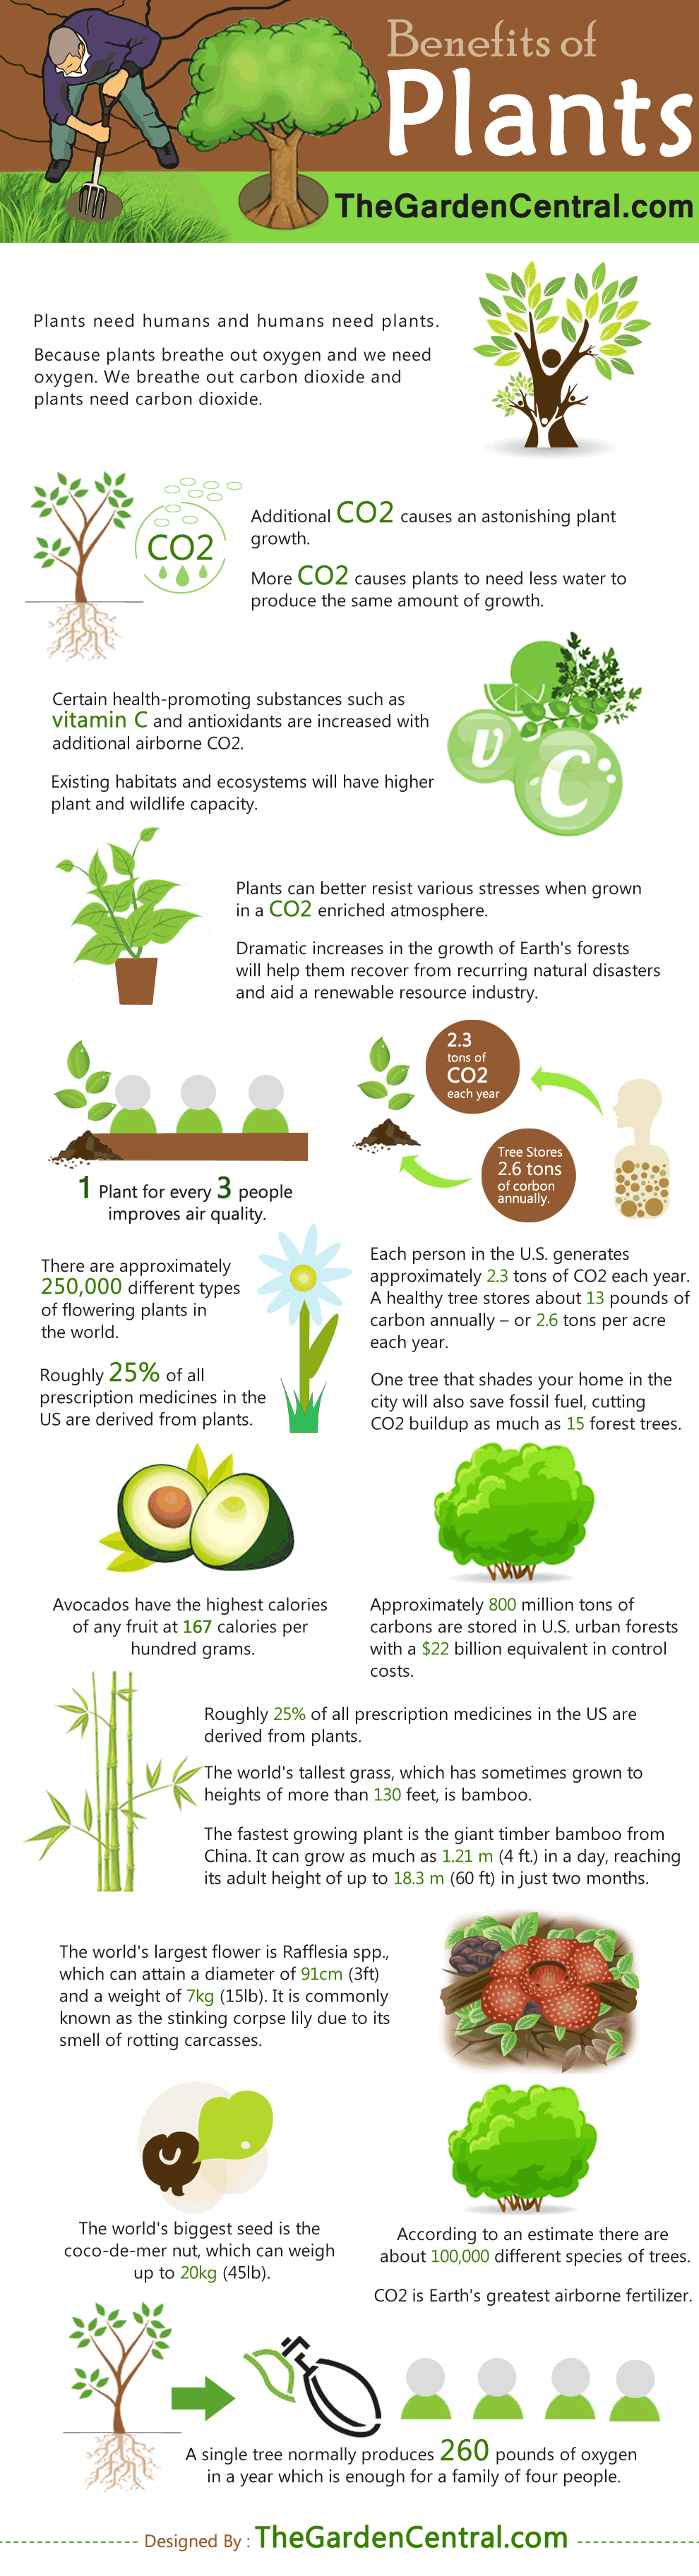 The Benefits of Plants